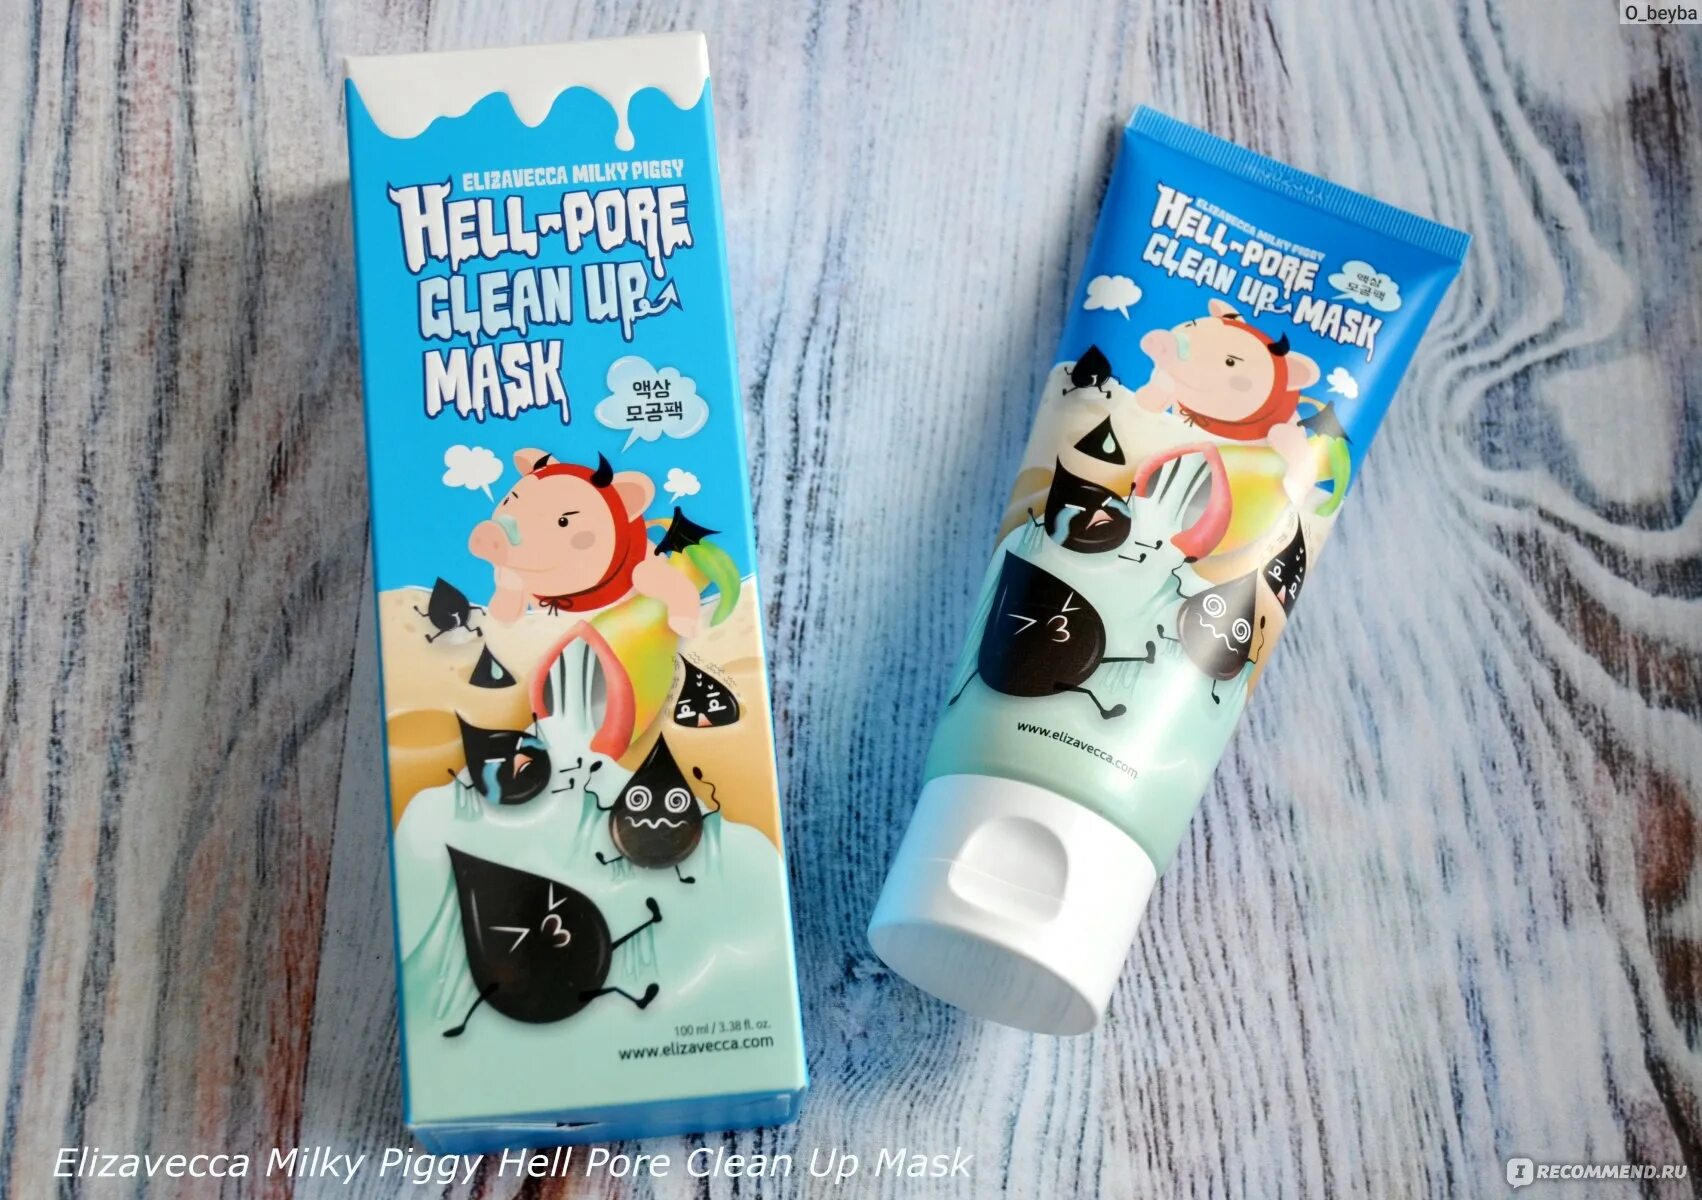 Hell Pore clean up Mask. Milky Piggy Hell Pore. Milky Piggy Hell-Pore clean up Mask, 100мл. Hell Pore clean up продукция. Milky piggy hell pore clean up